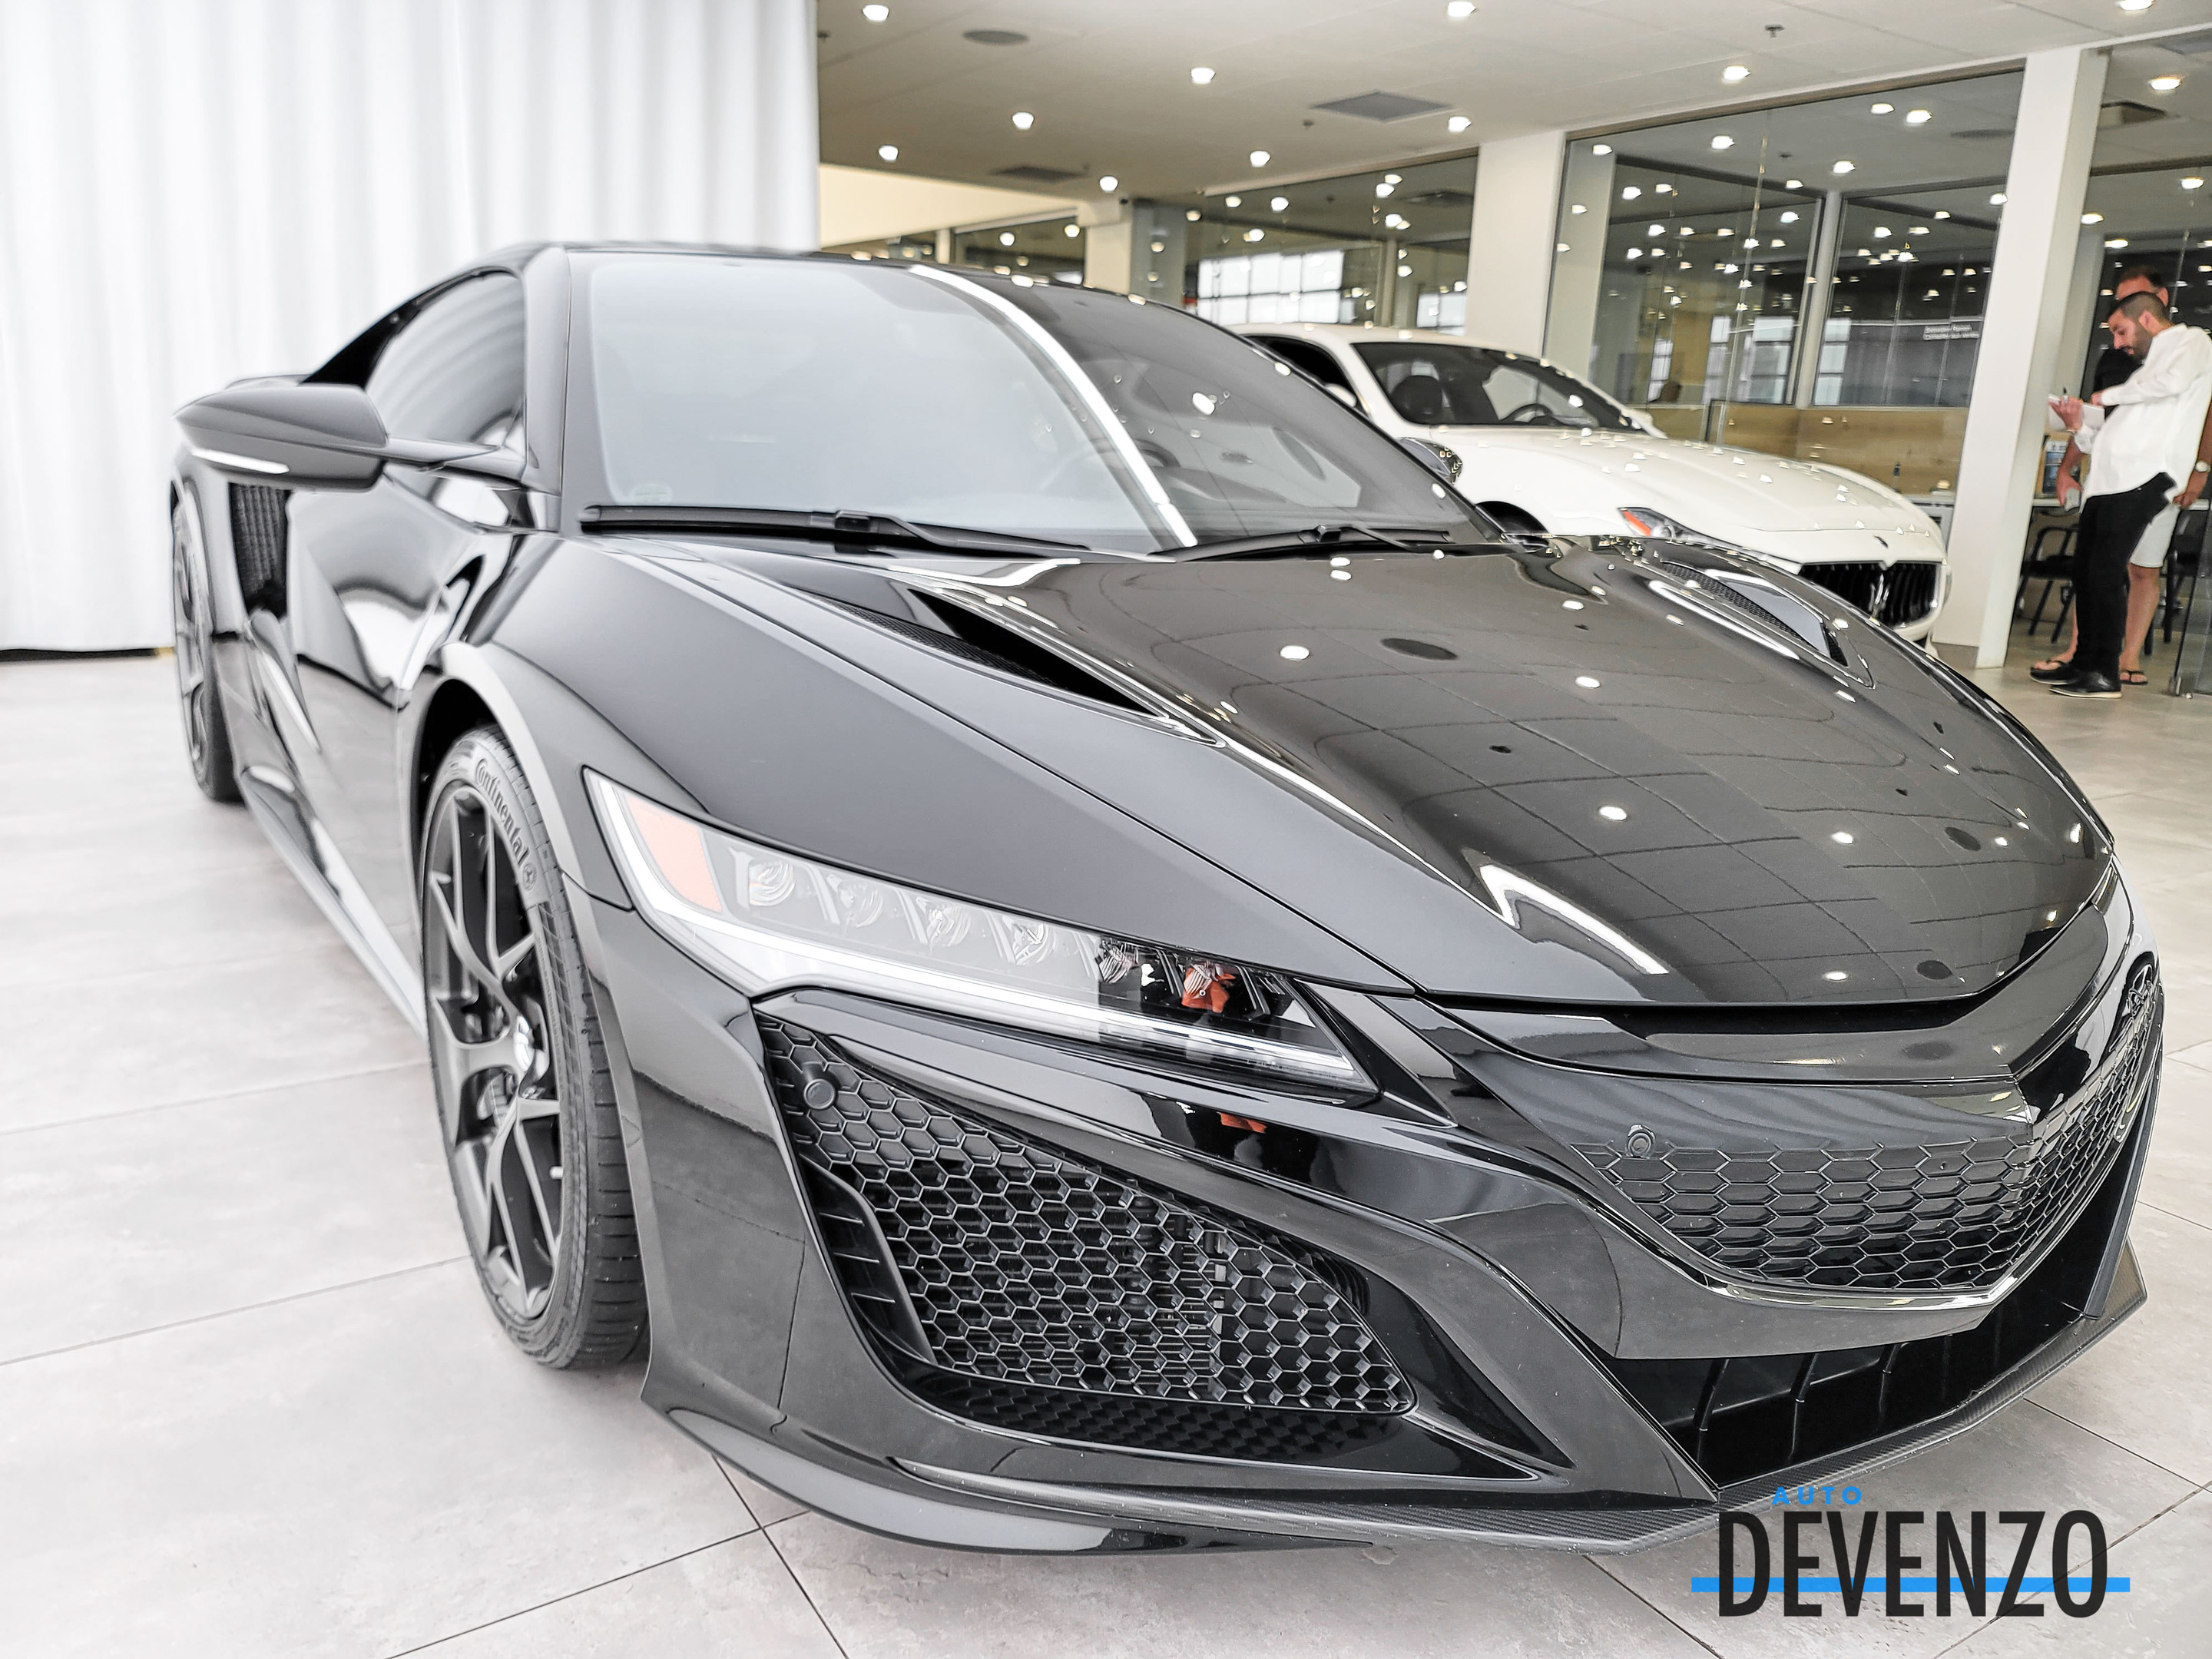 2017 Acura NSX HYBRID FULL CARBON FIBER PACKAGE / TECH PACKAGE complet